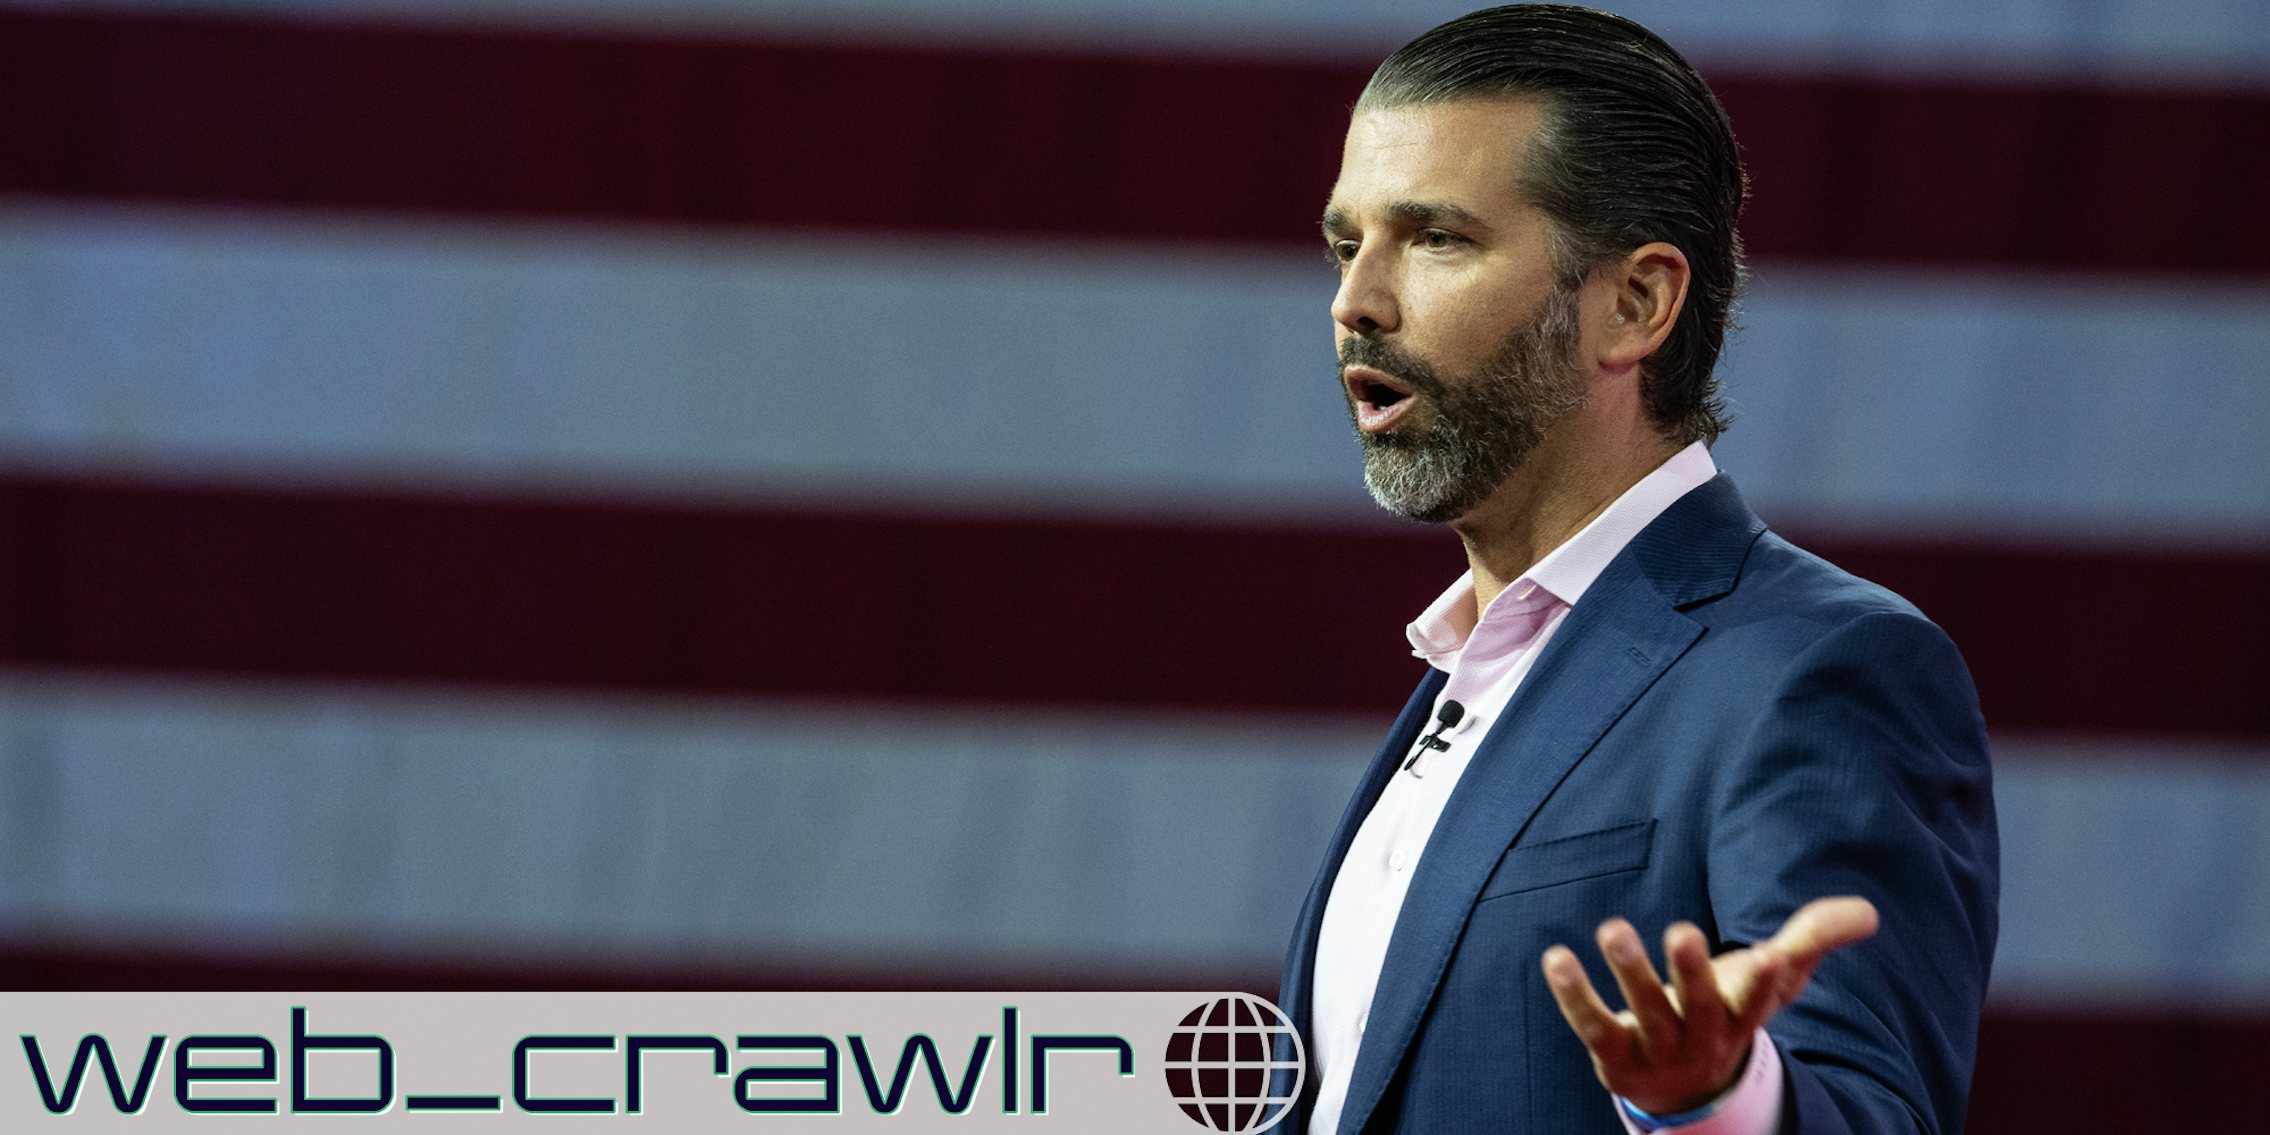 Donald Trump Jr. with his mouth open on a red and white background. The Daily Dot newsletter web_crawlr image is in the bottom left corner.